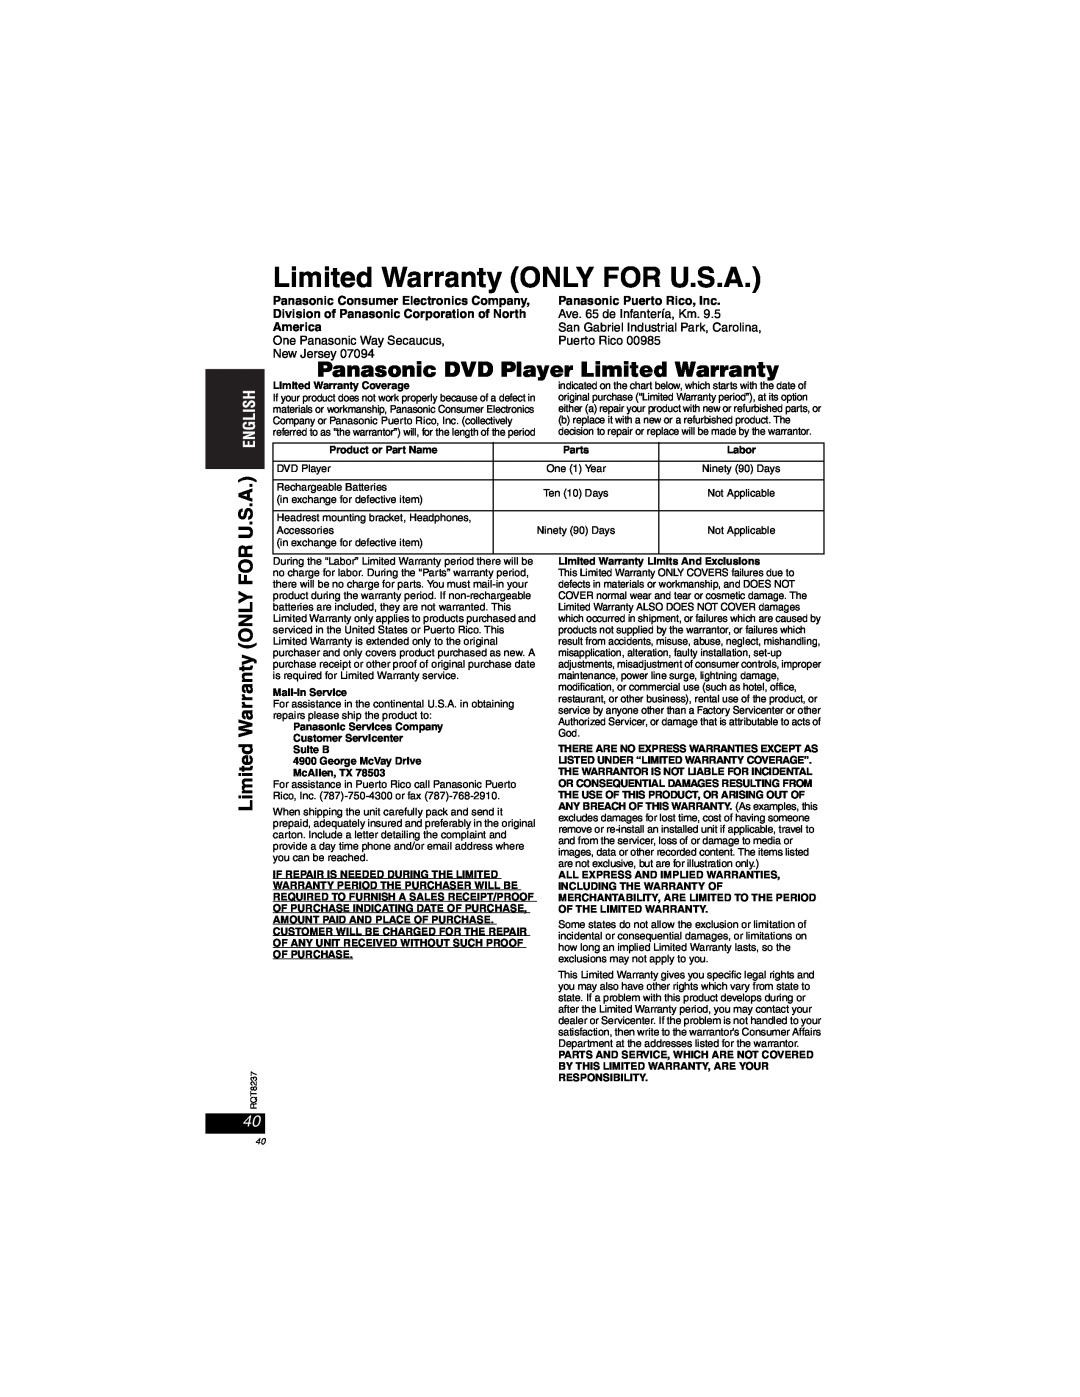 Panasonic DVD-LX97 Limited Warranty ONLY FOR U.S.A, Panasonic DVD Player Limited Warranty, Panasonic Puerto Rico, Inc 